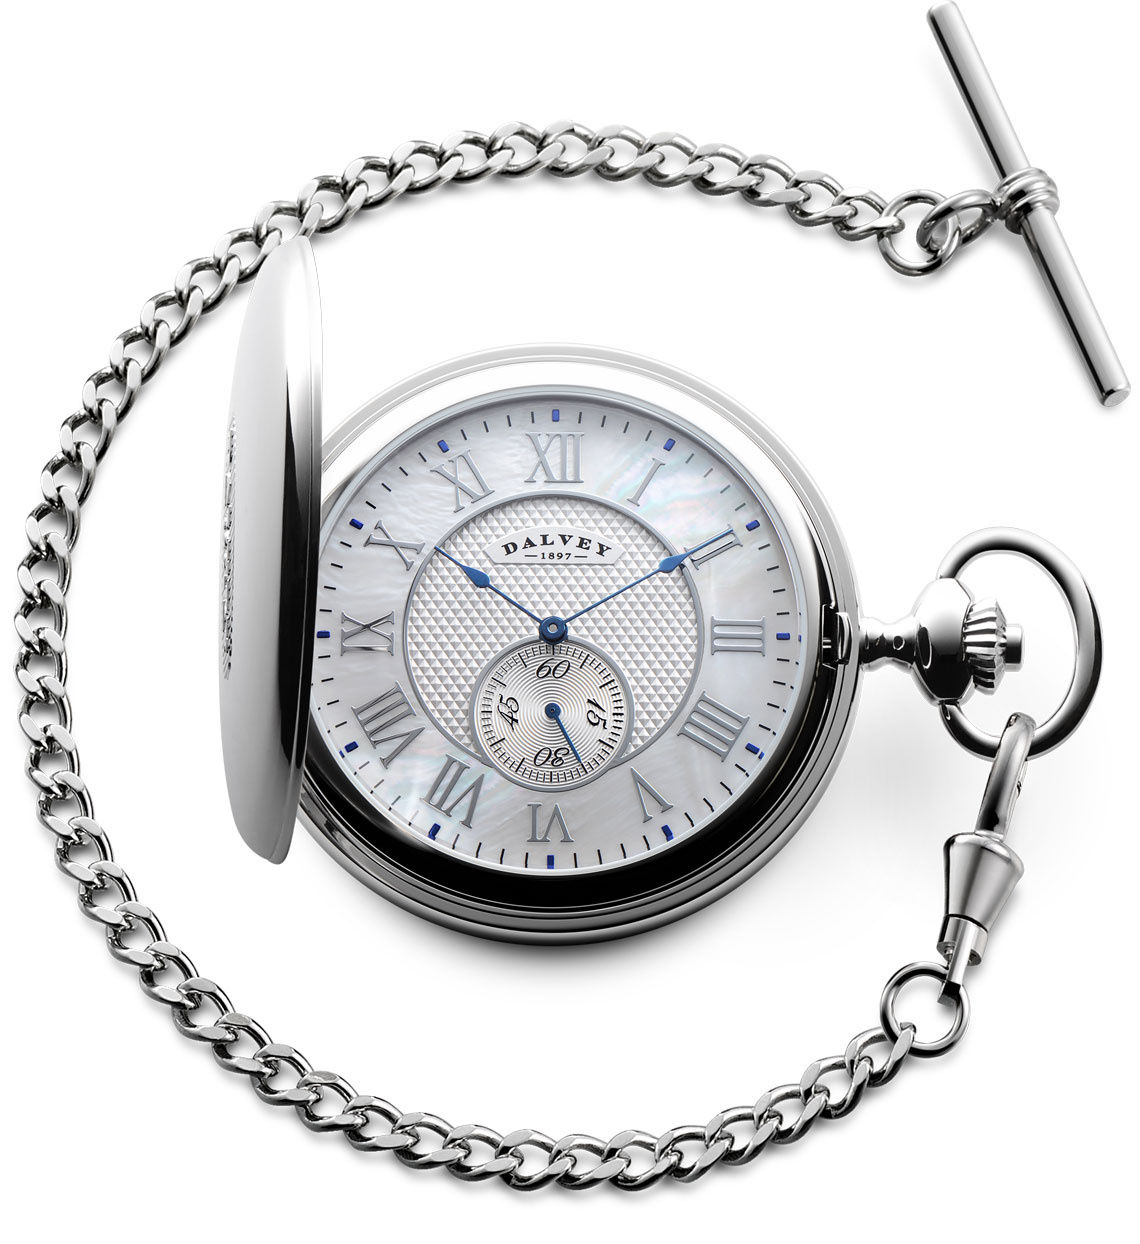 Top 10 Facts About The Waltham Pocket Watch-hkpdtq2012.edu.vn